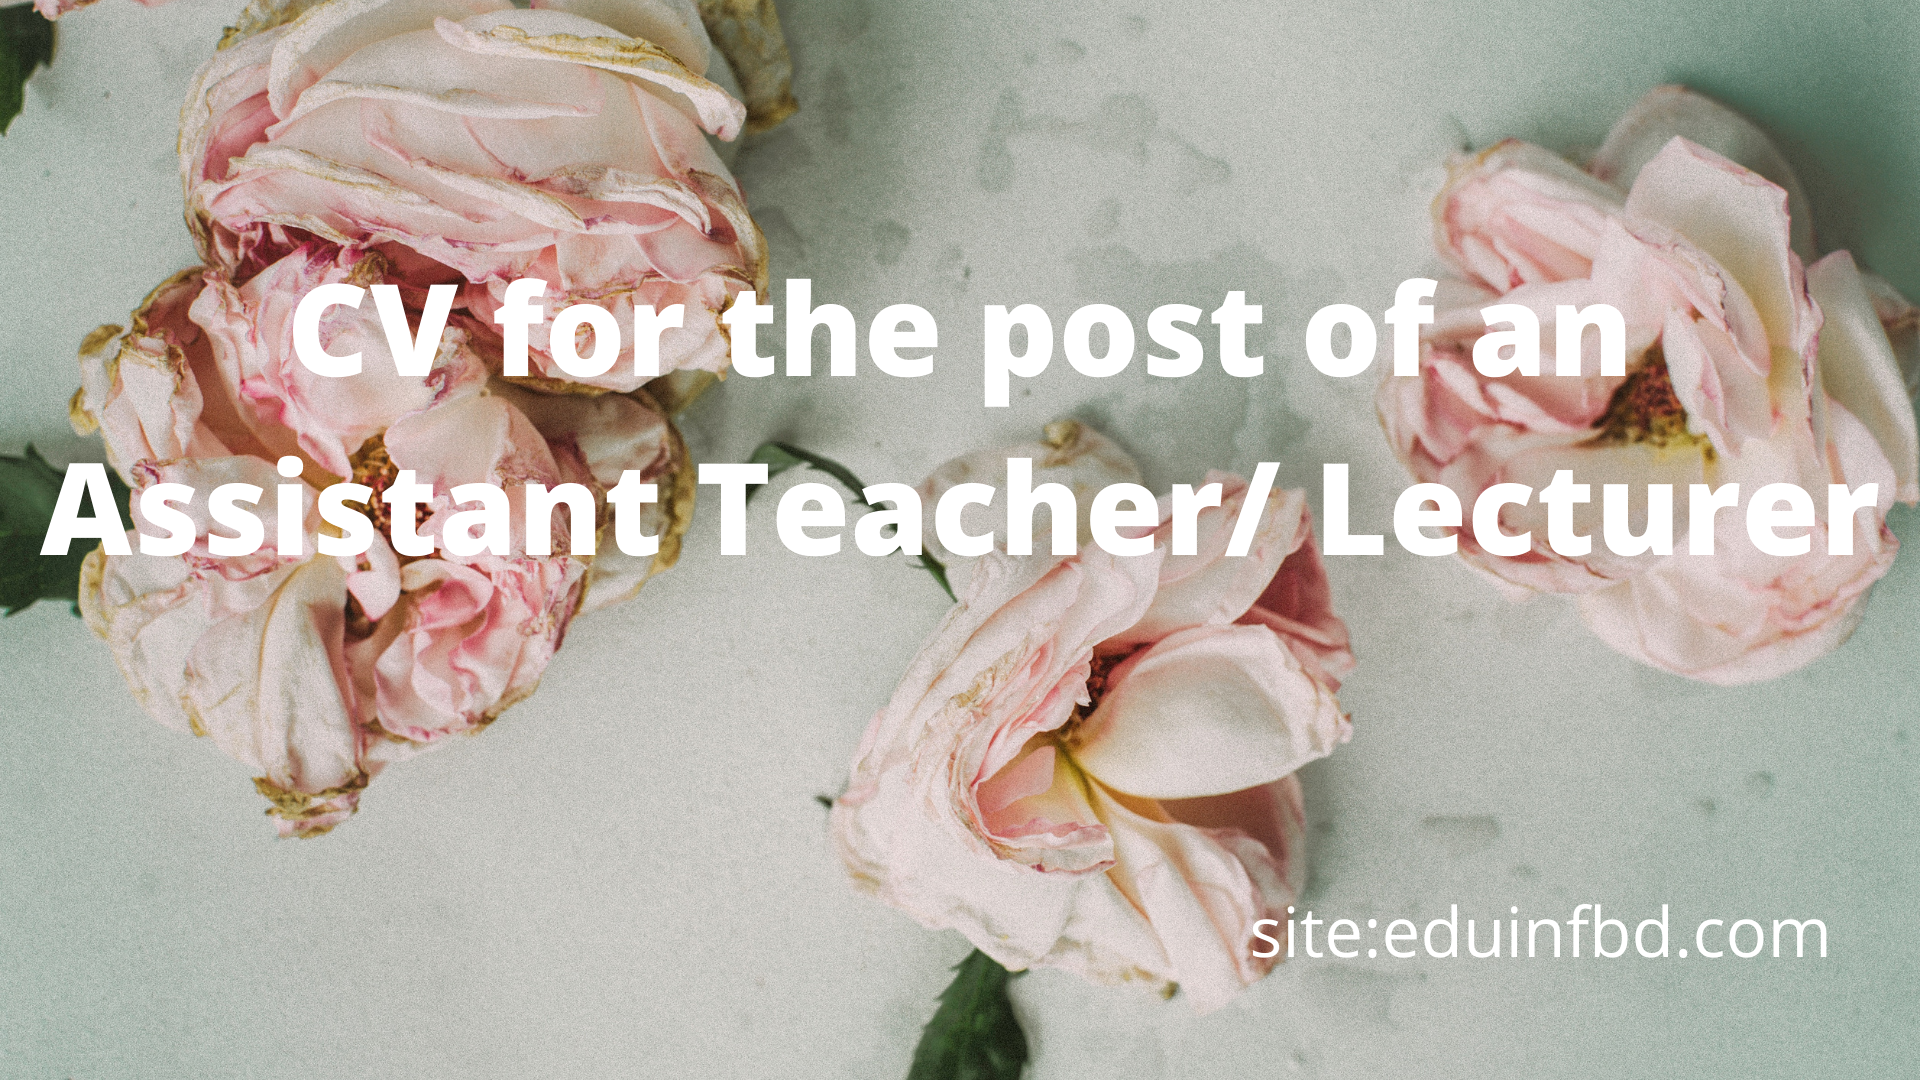 CV for the post of an Assistant Teacher Lecturer